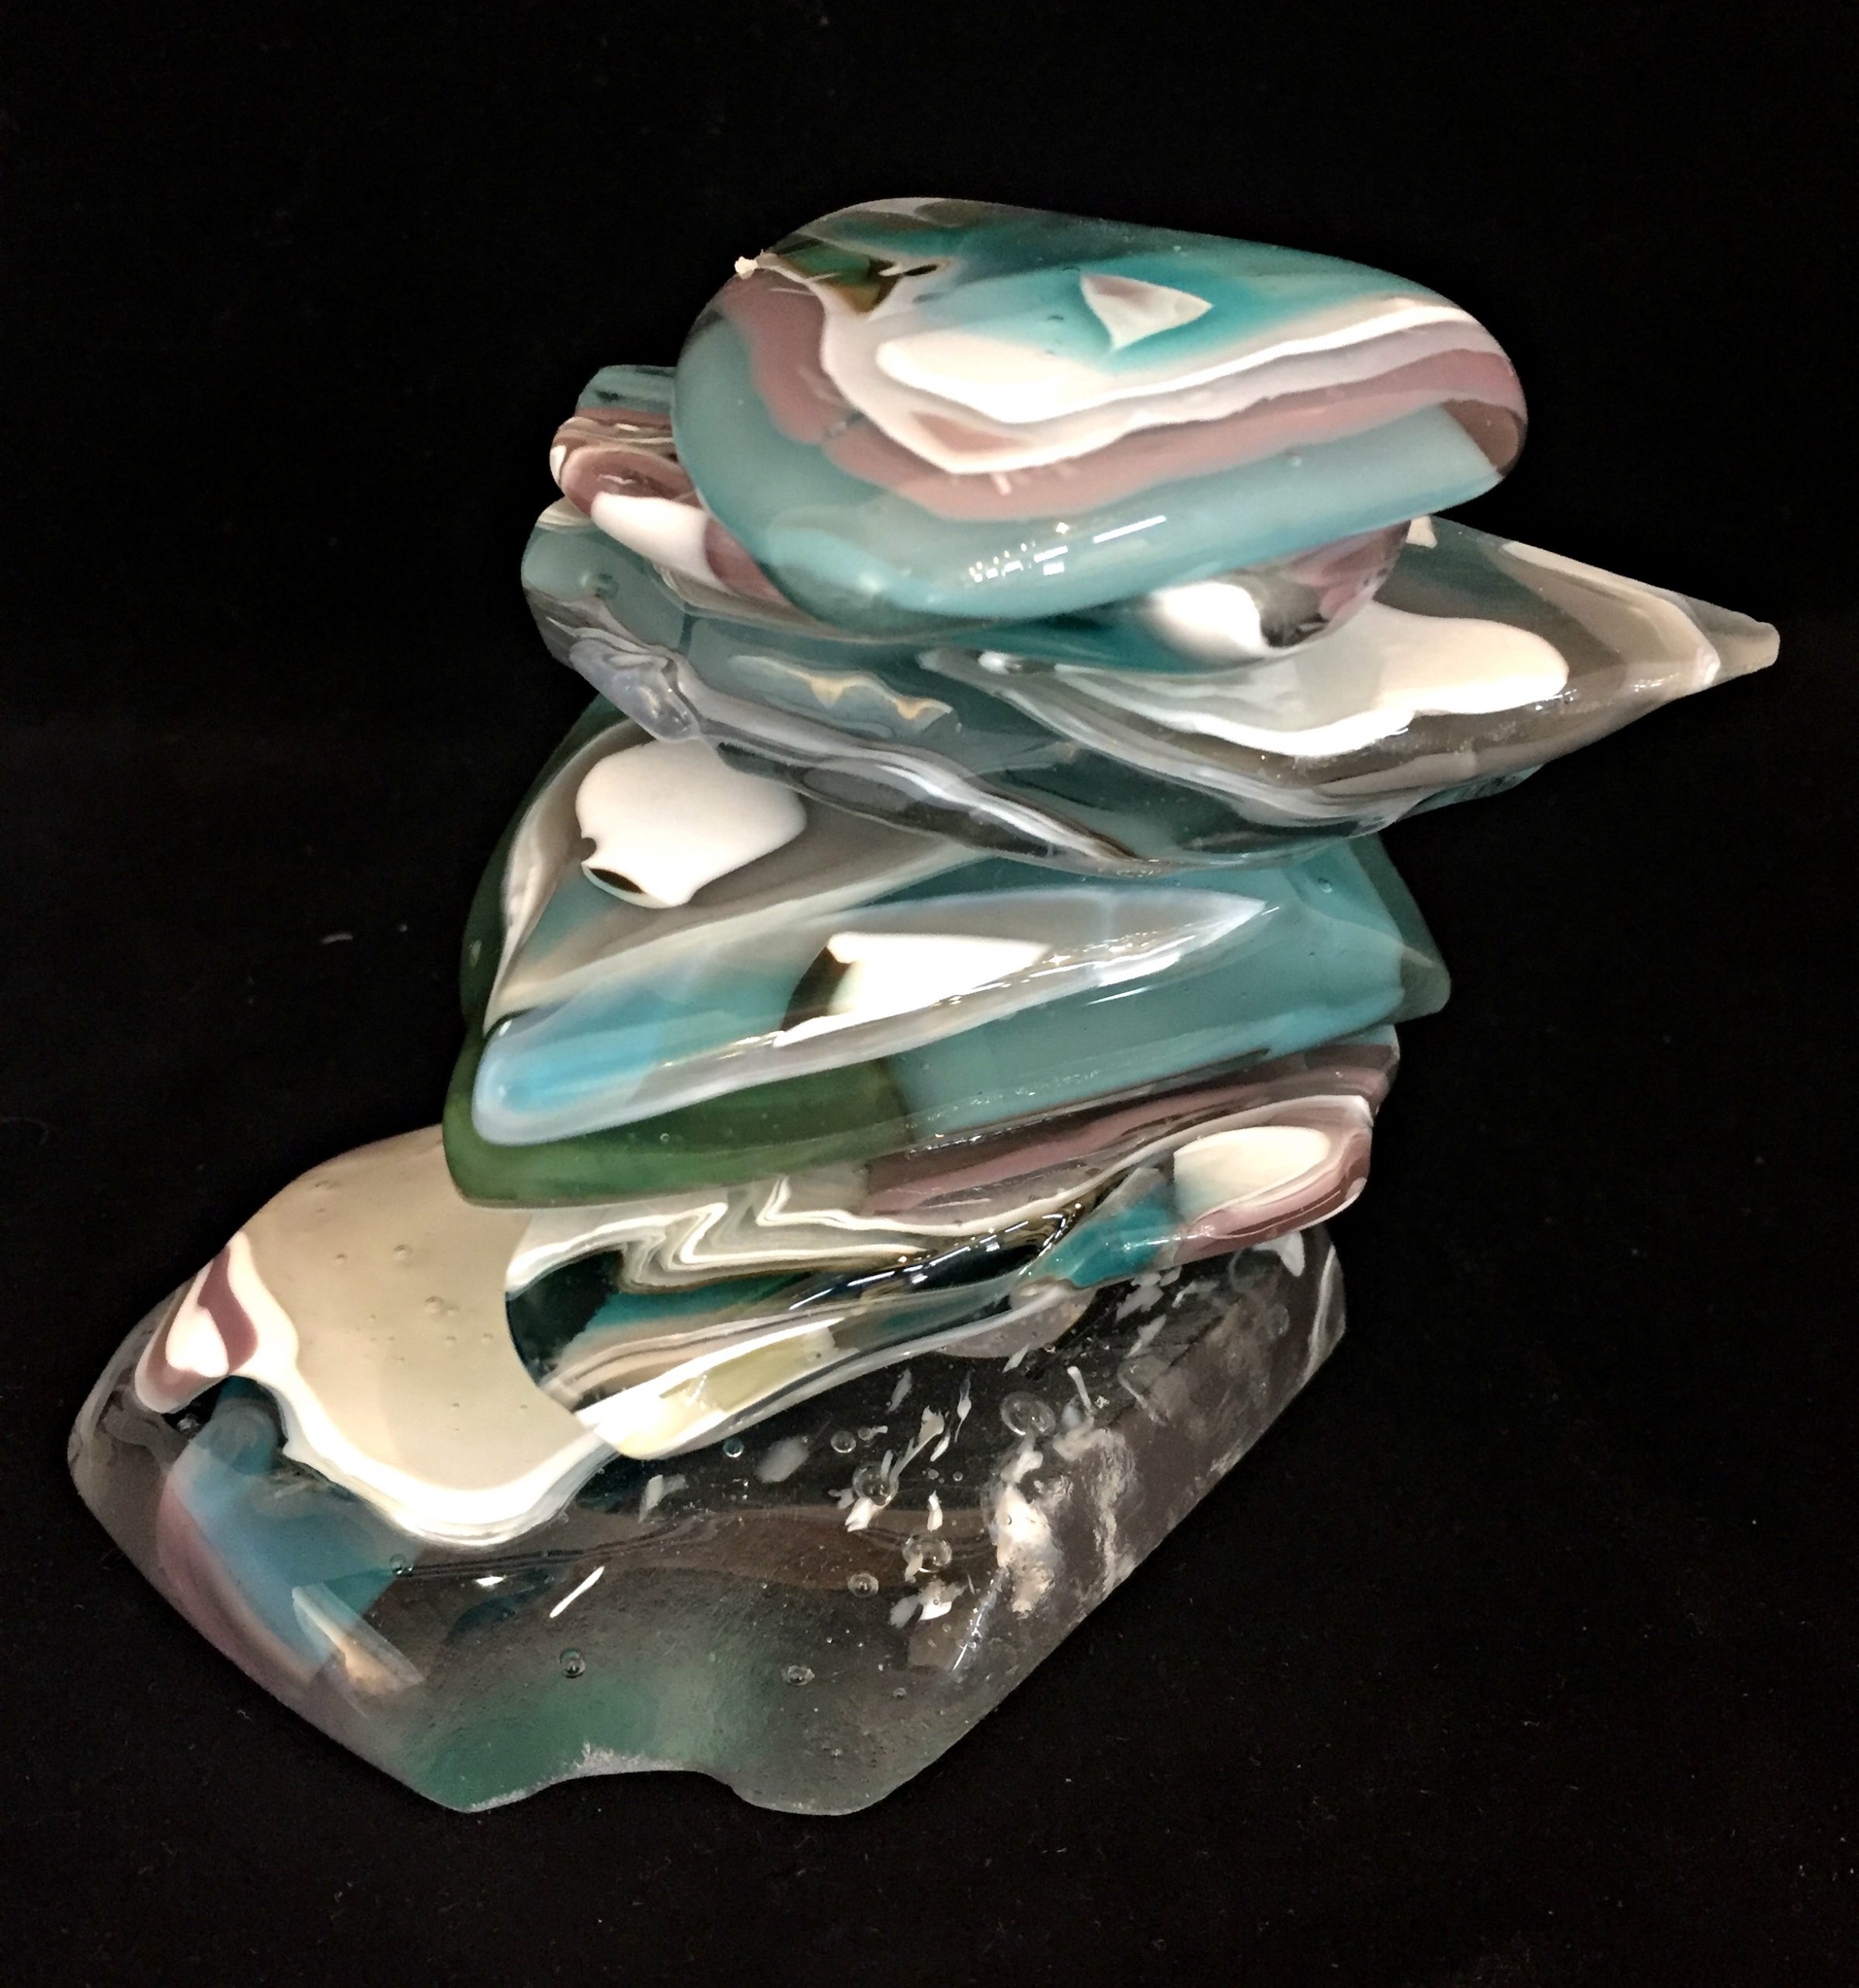 Rocky Mountain Cairn 49, cast glass sculpture by Heather Cuell | Effusion Art Gallery + Cast Glass Studio, Invermere BC